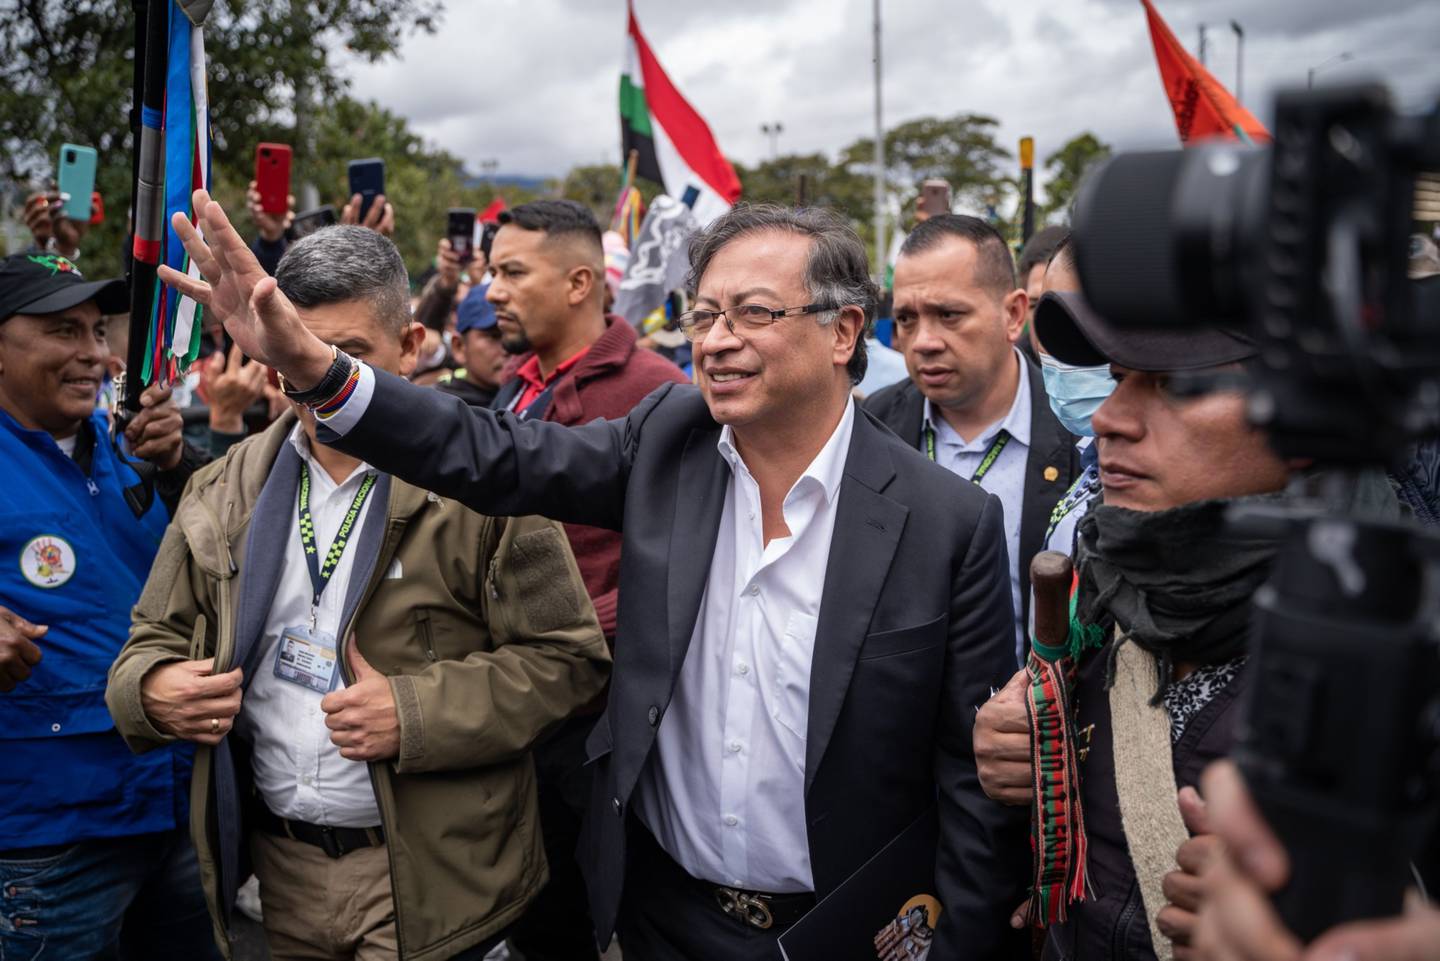 Gustavo Petro assumes control of an economy with government debt near record levels.